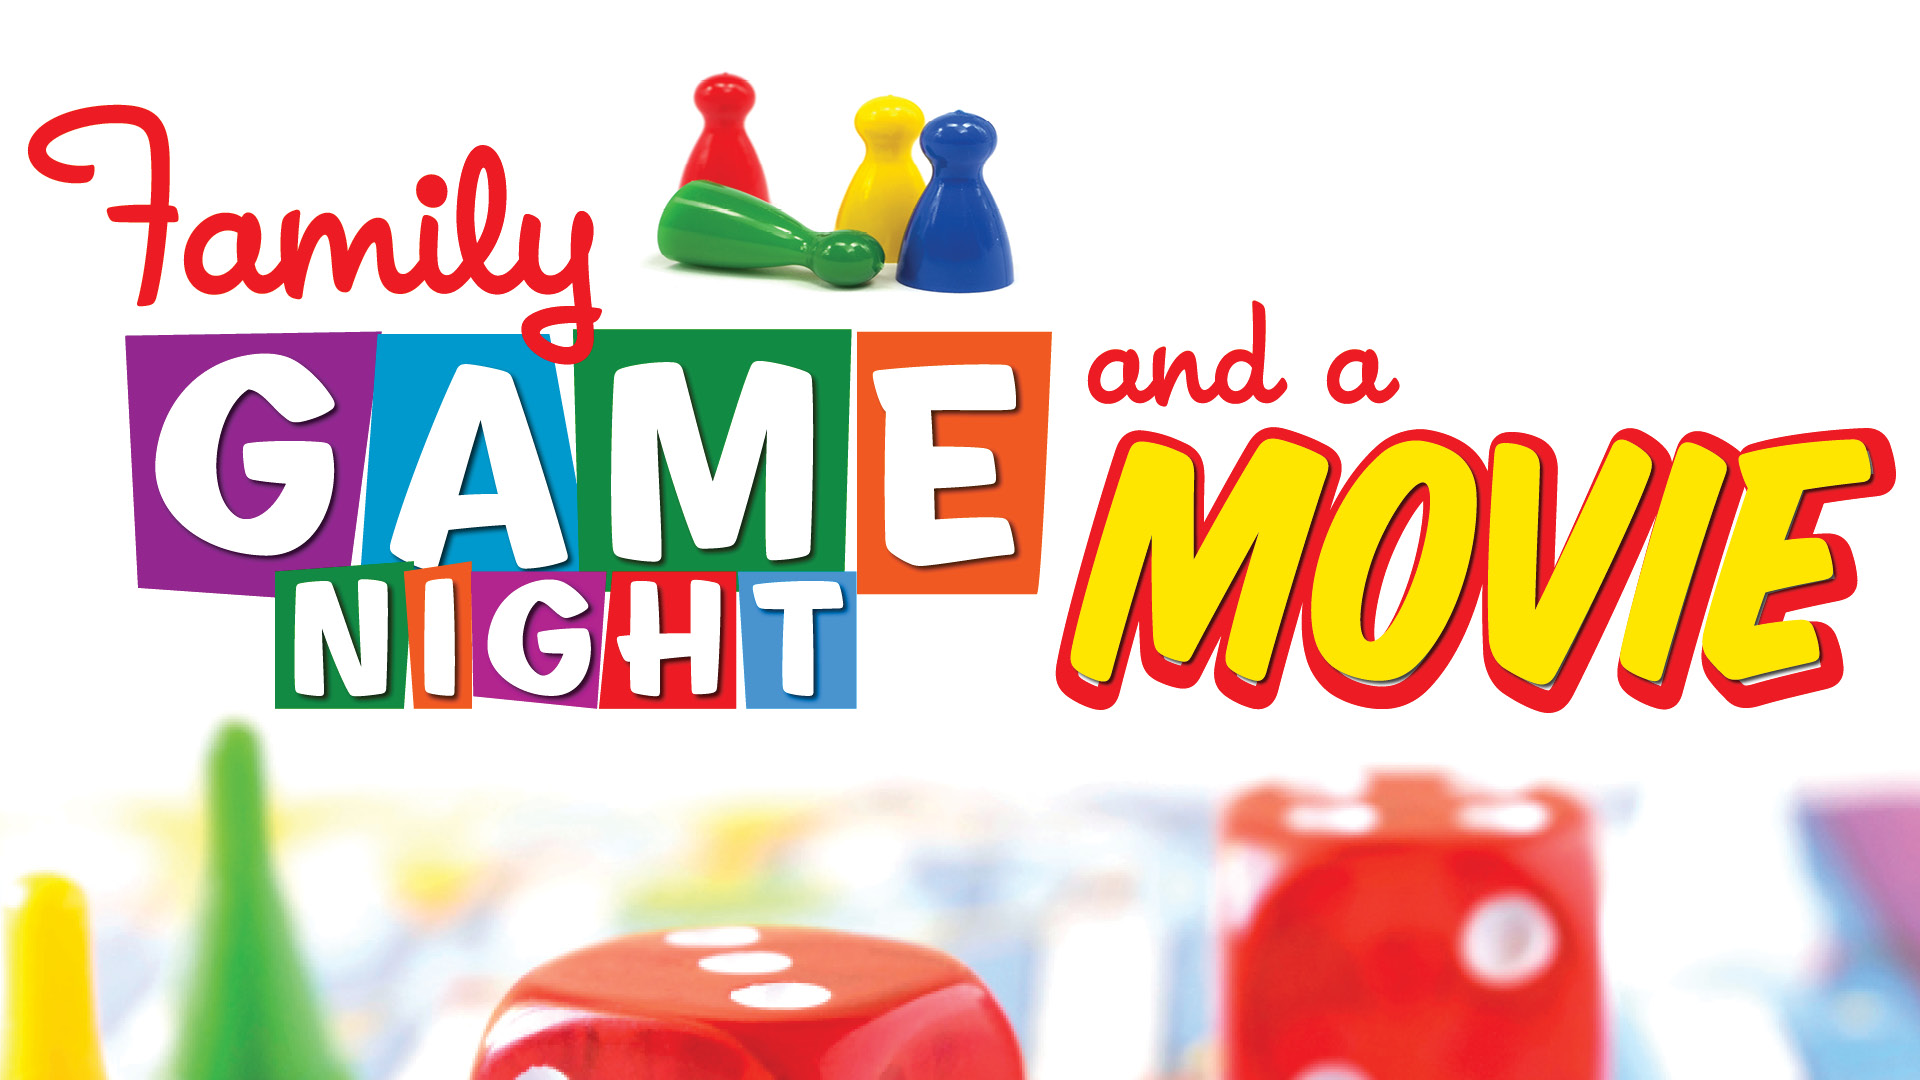 Family Game Night and a Movie